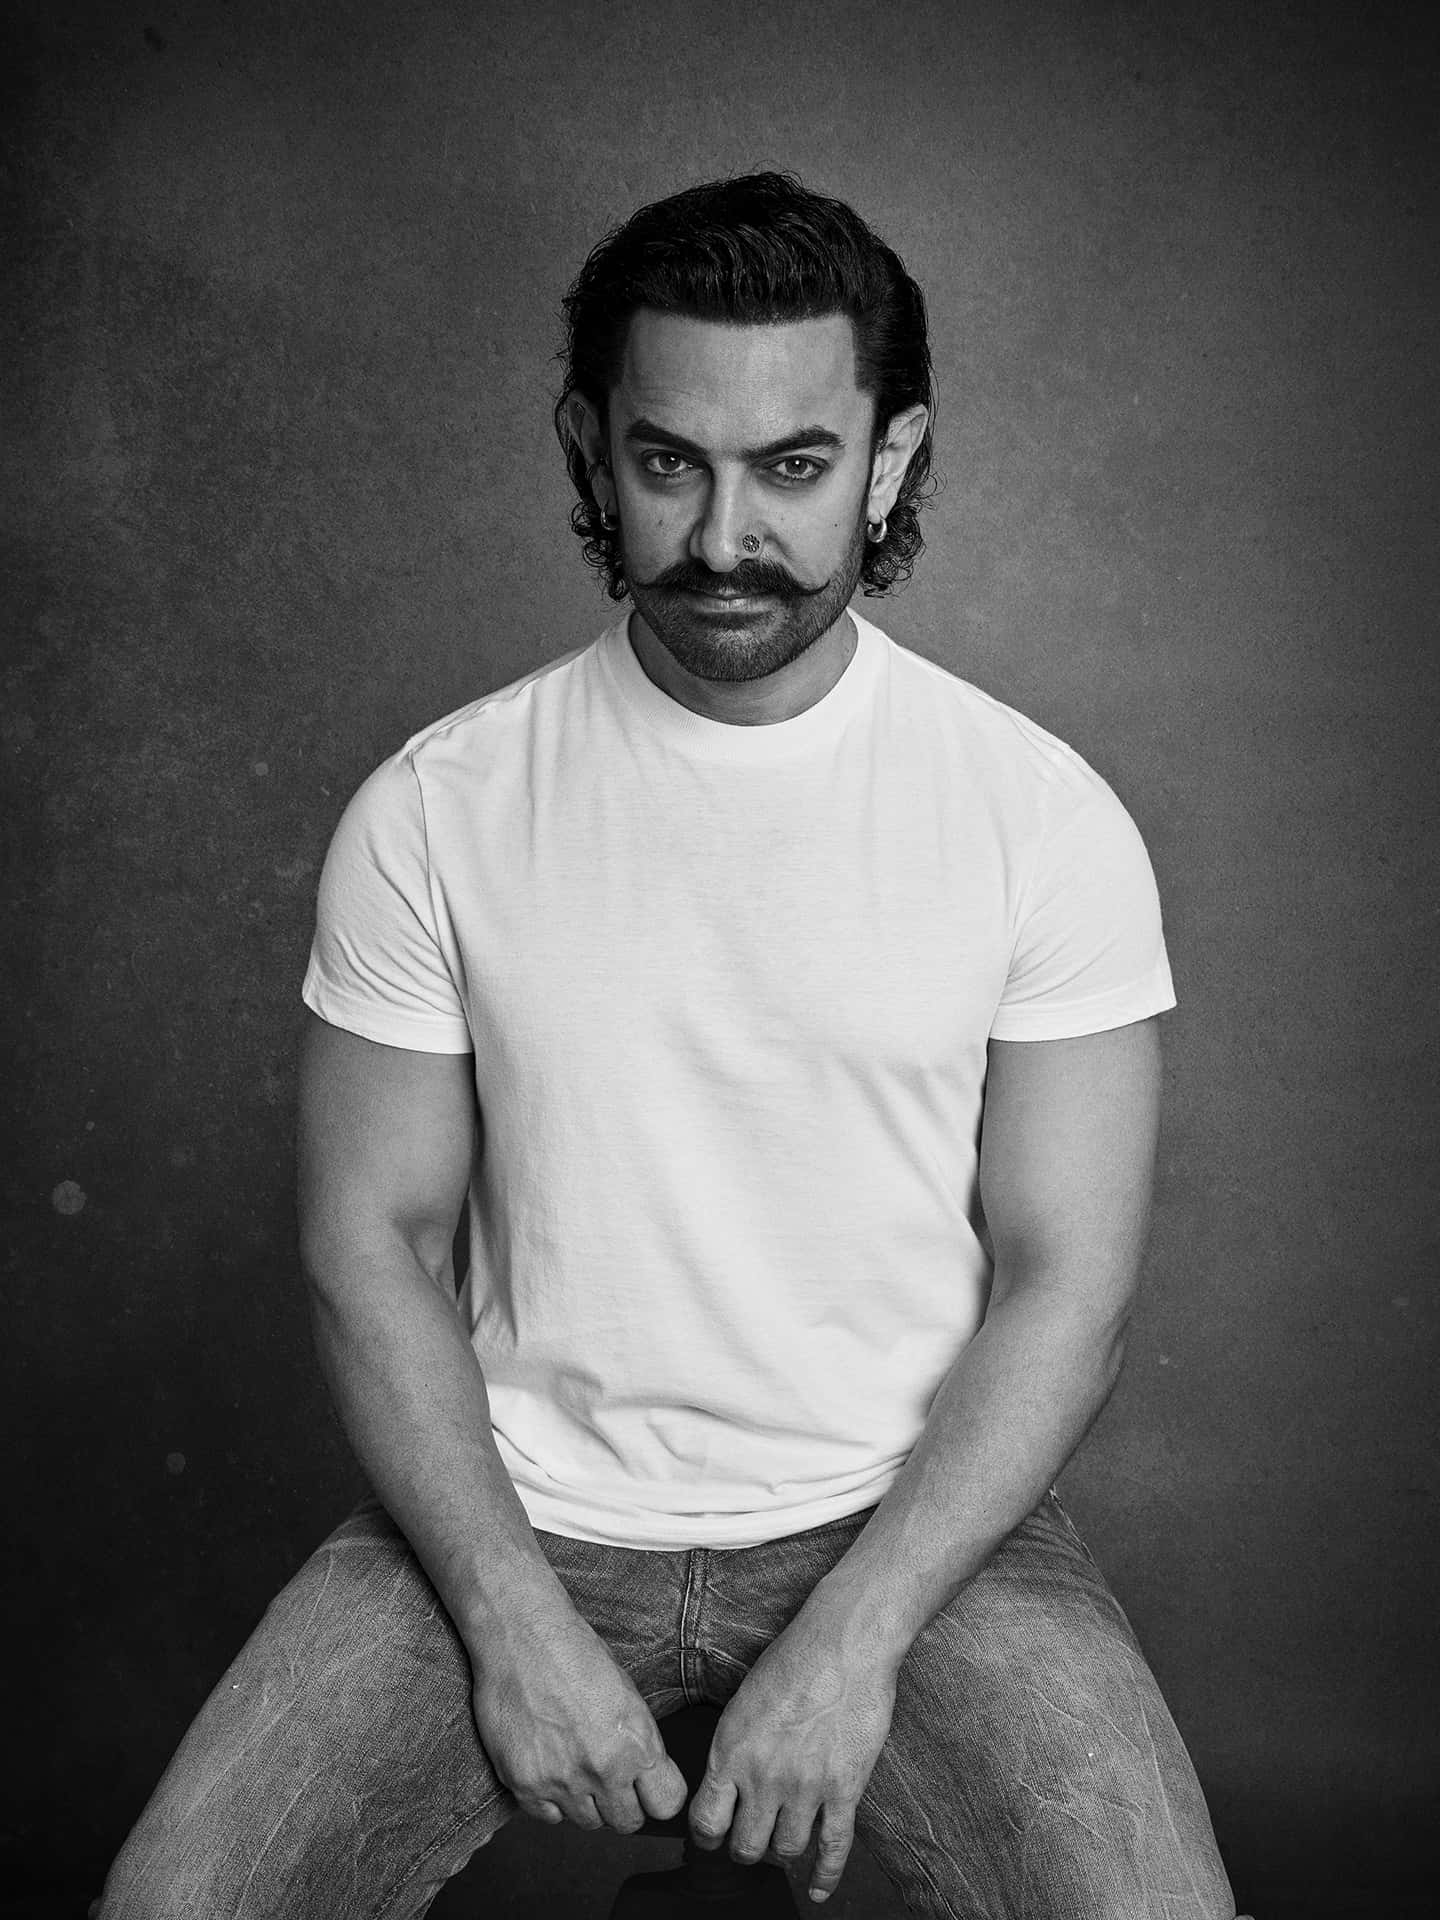 Aamir Khan, Indian actor and producer